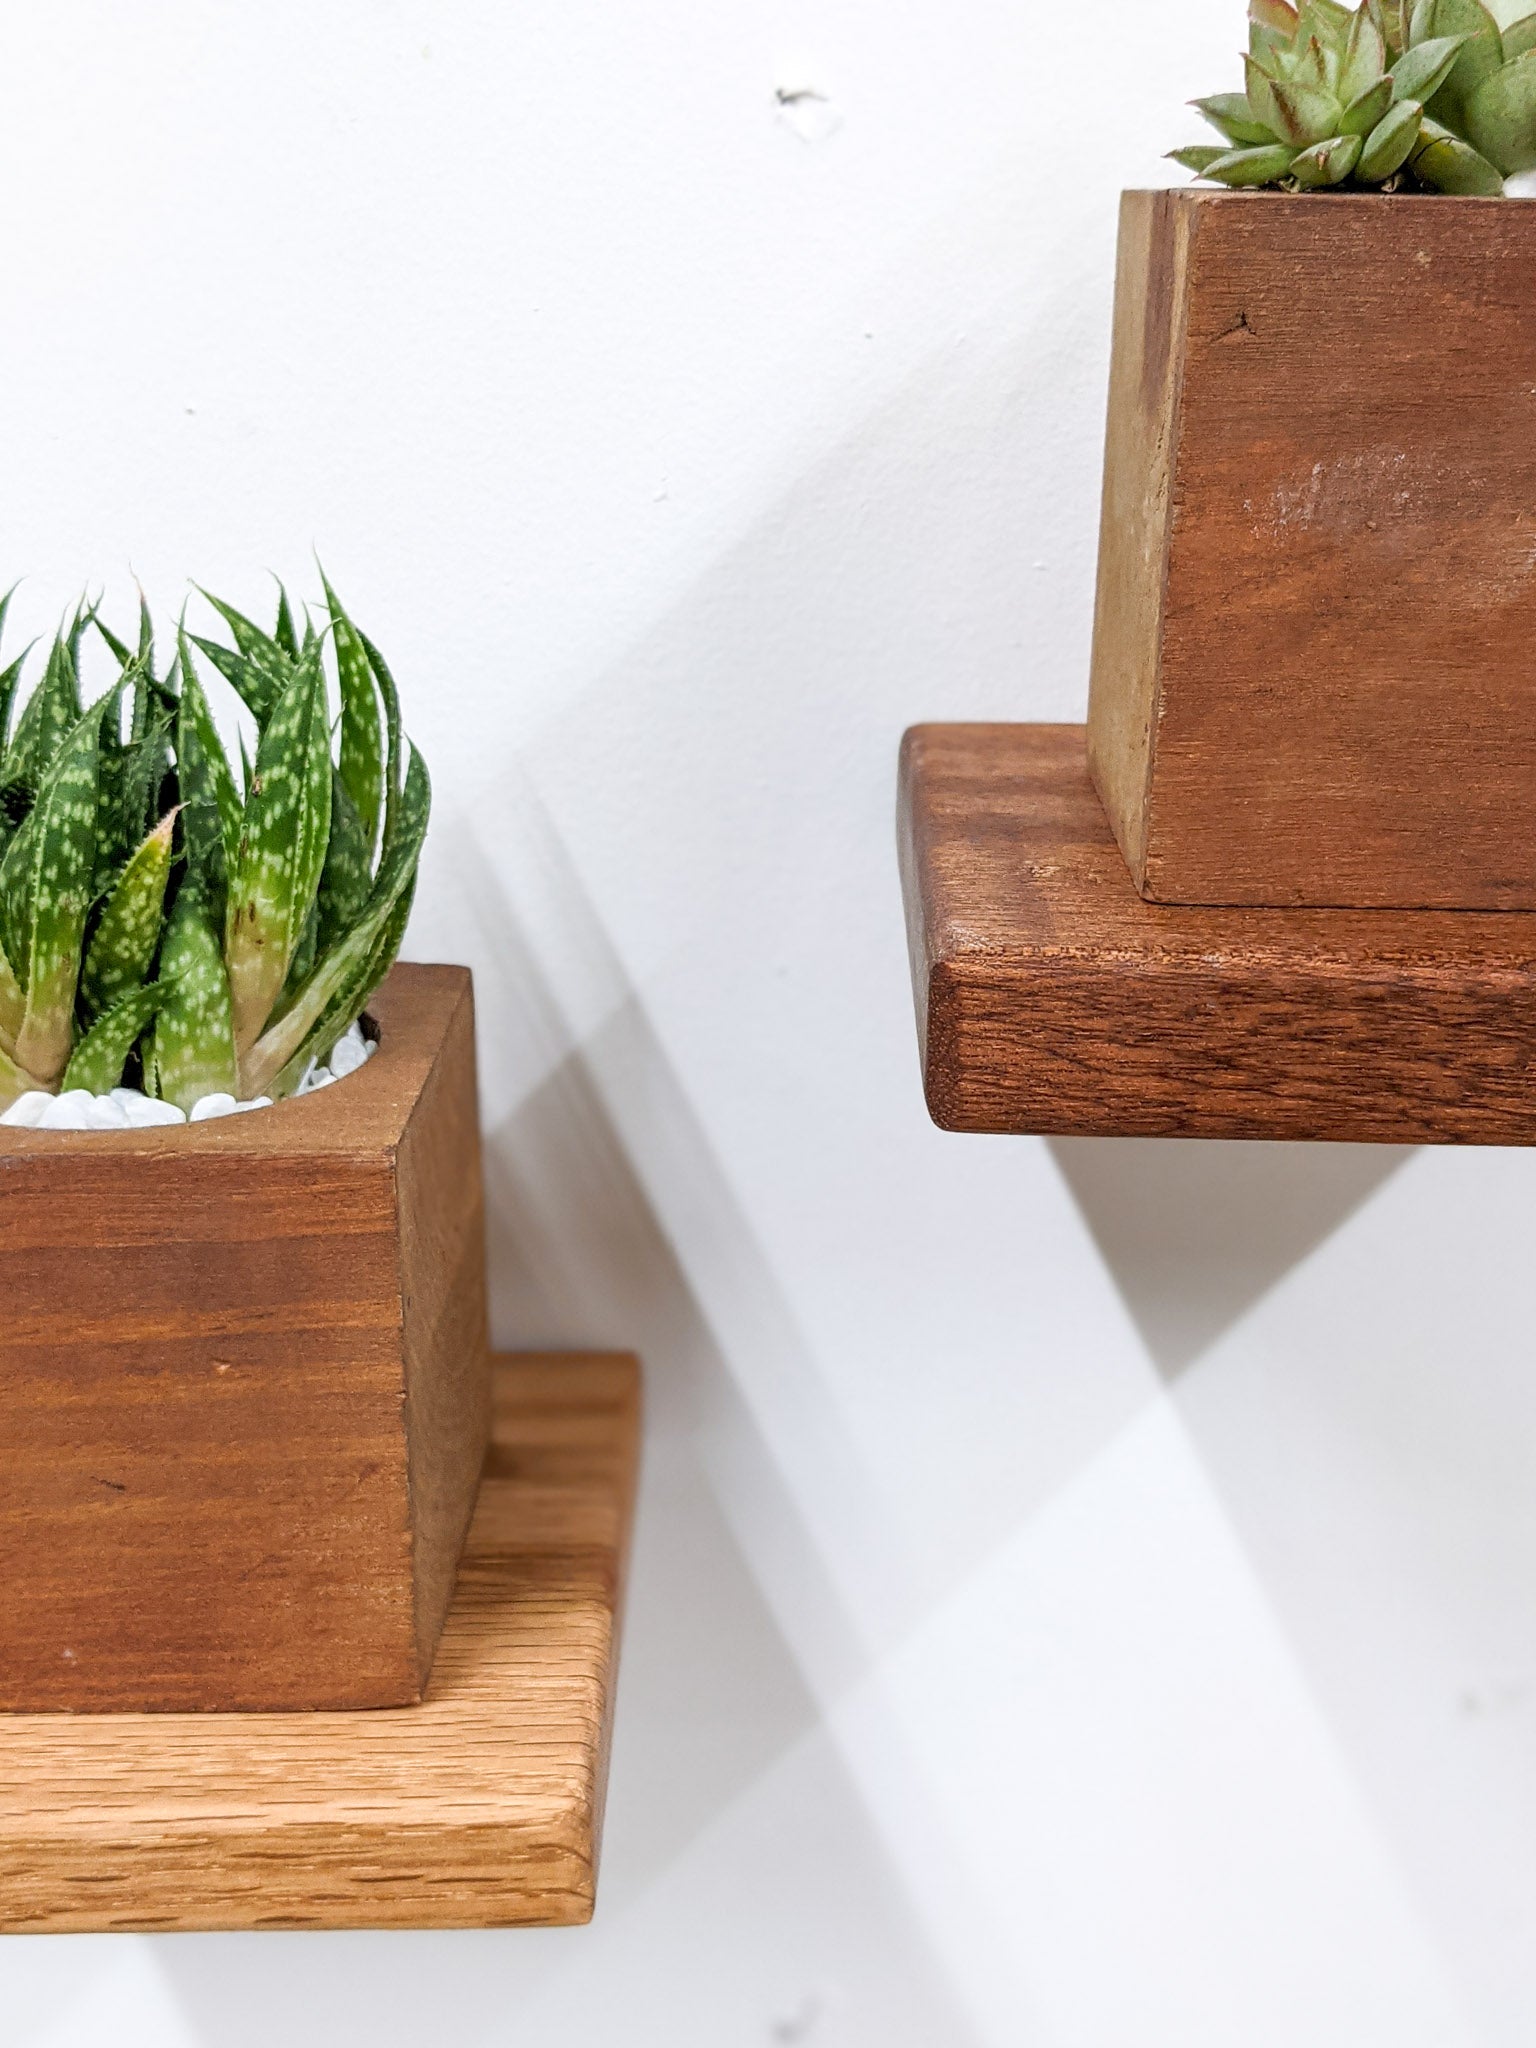 The edges of a small square floating shelf in oak and mahogany are shown.